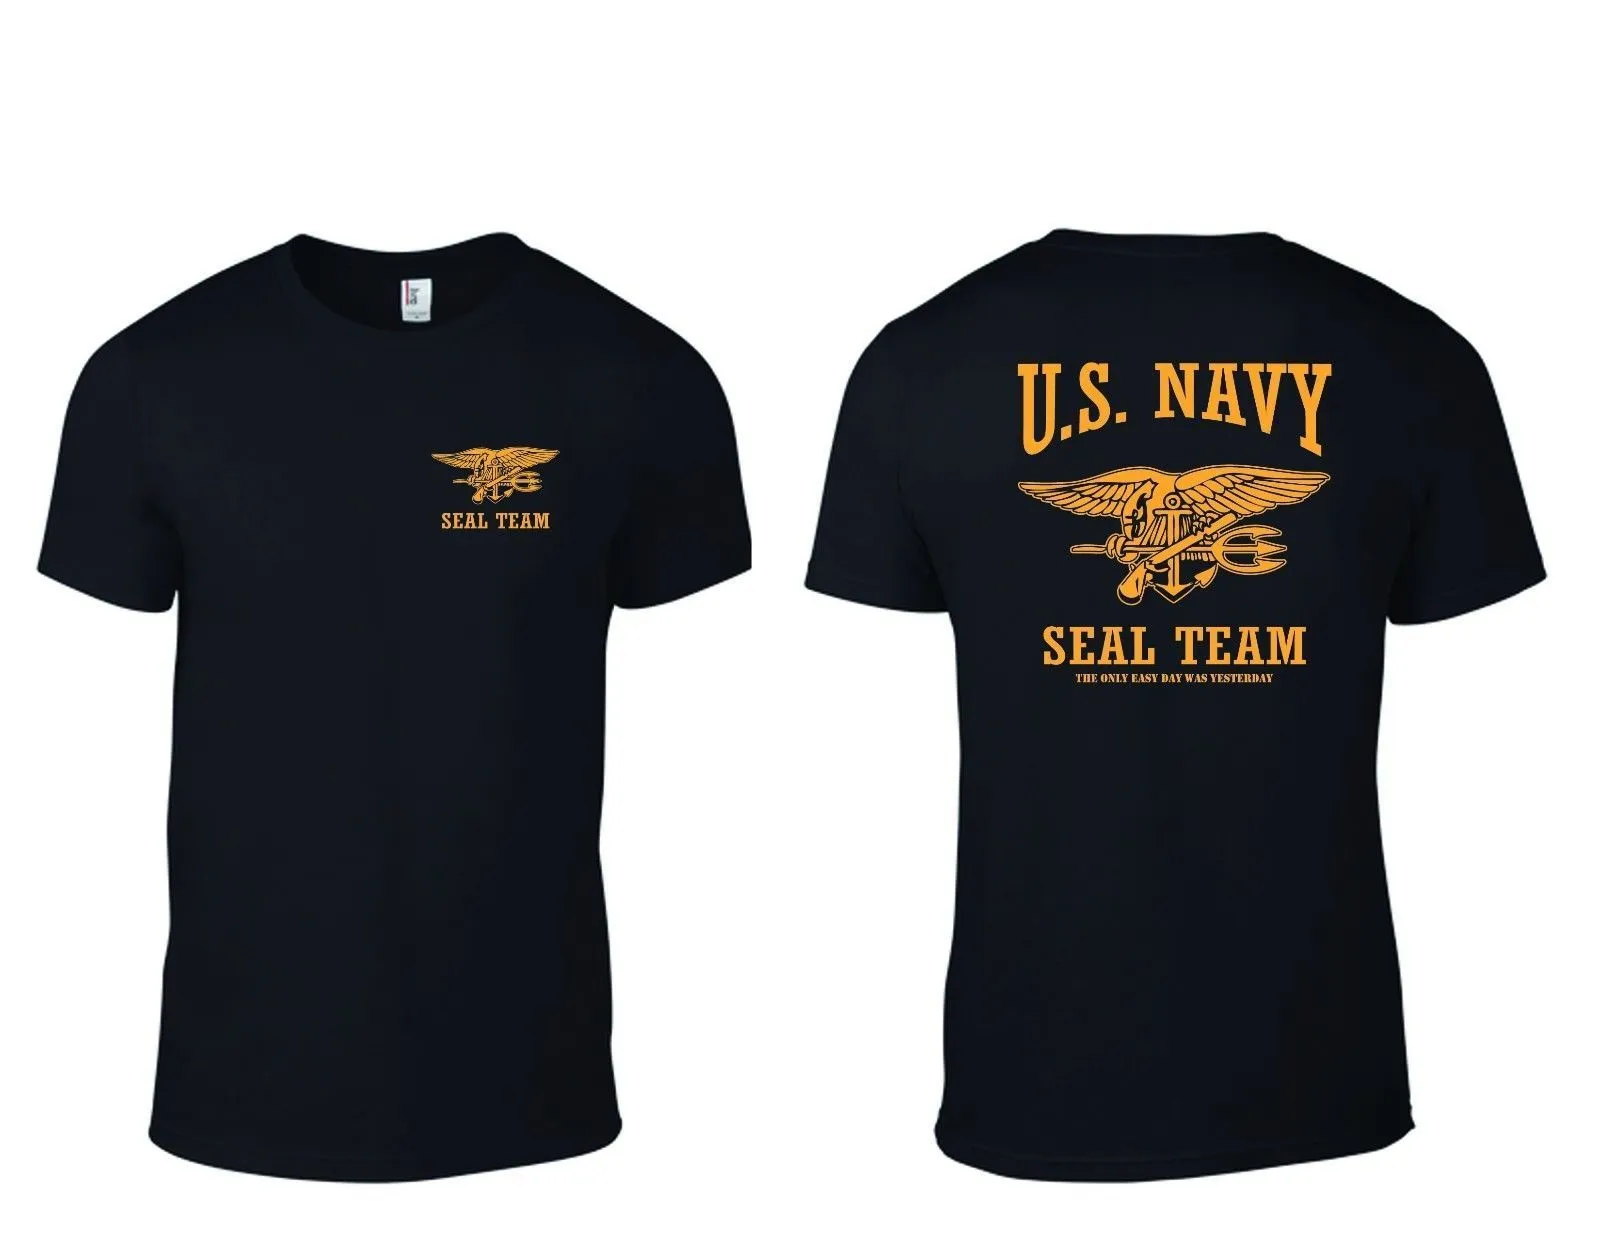 Nous. T-shirt Navy Seal Team Only Easy Day Was Hier B/y imprimé t-shirts manches courtes Hipster T-shirt grande taille